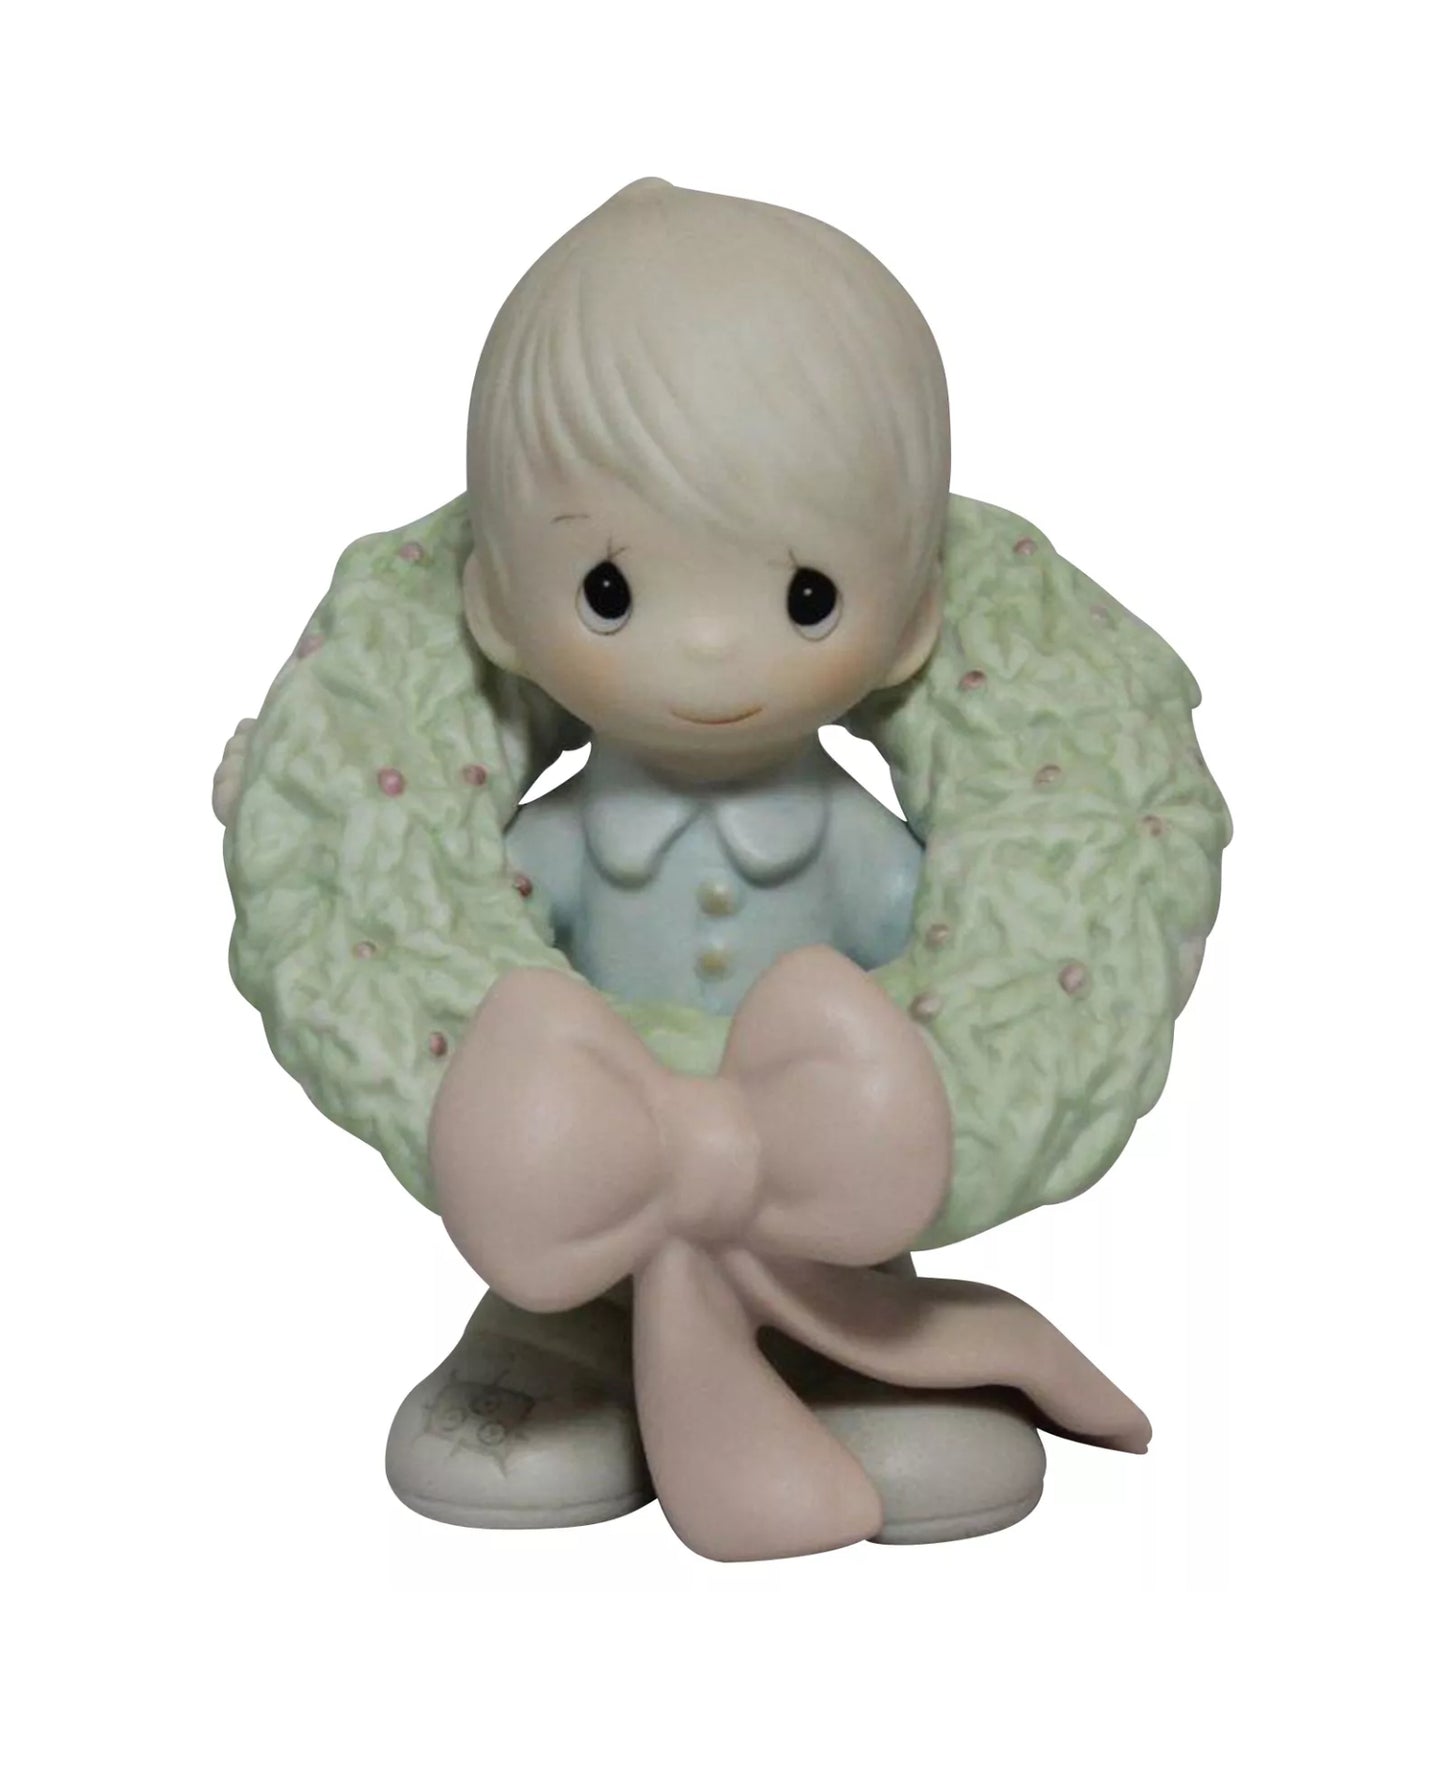 Surrounded With Joy - Precious Moment Figurine